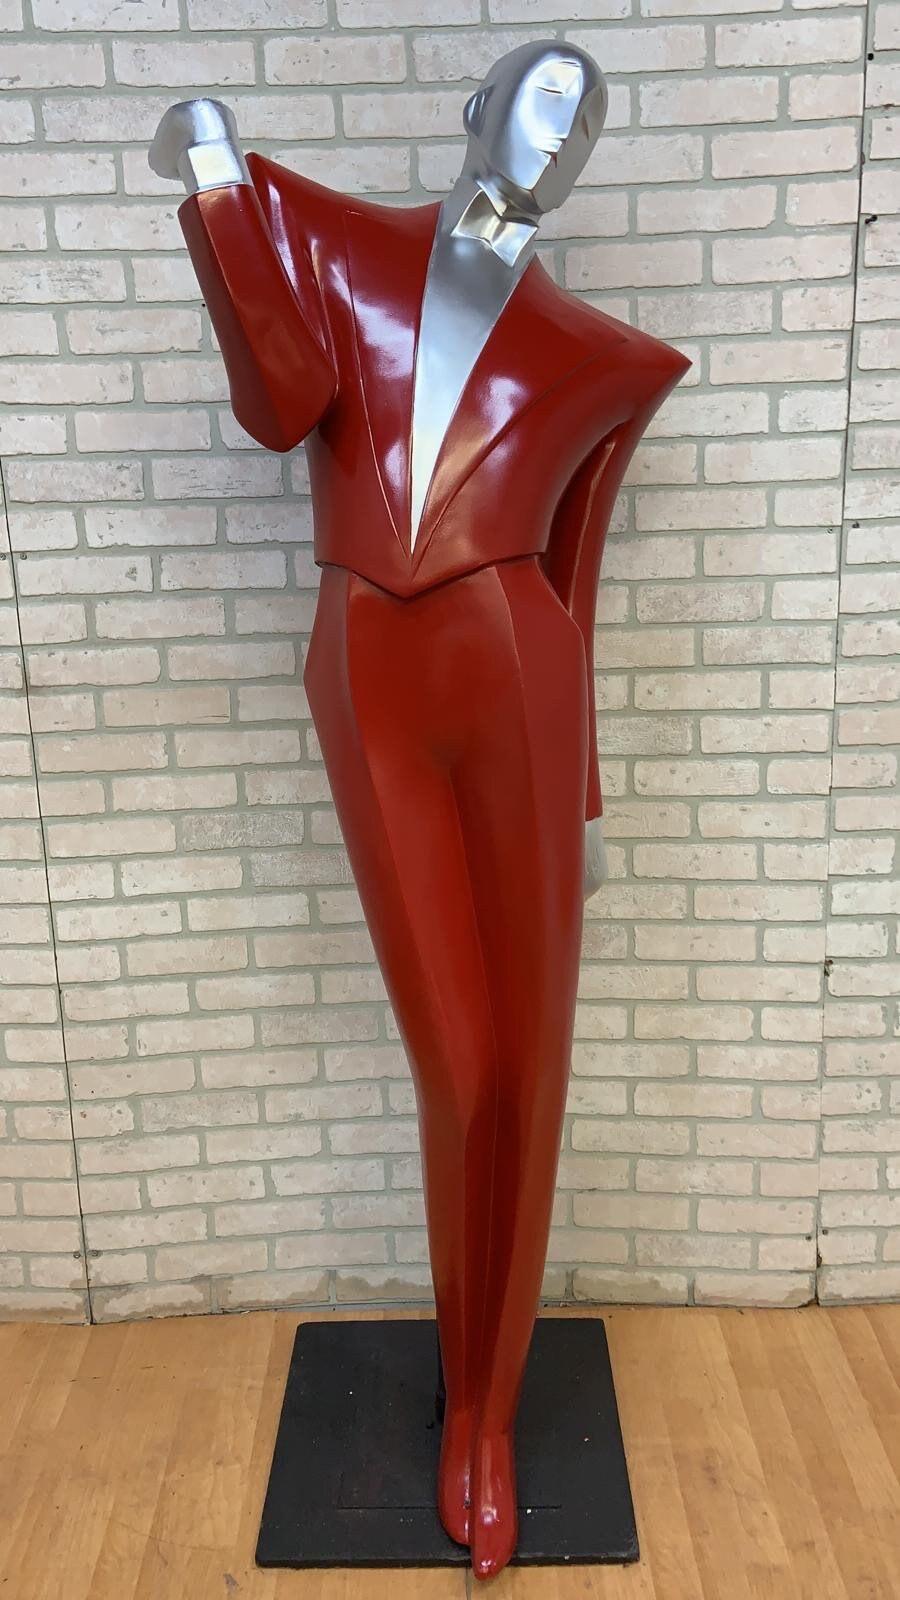 Vintage Rare English Art Deco Revival Chrome & Resin LeGarcon Mannequin by Lindsey Balkweill 

This rare English Art Deco Revival Silver and Red Mannequin was created in the 1970s by sculptor and ceramicist Lindsey Balkweill. 

This iconic